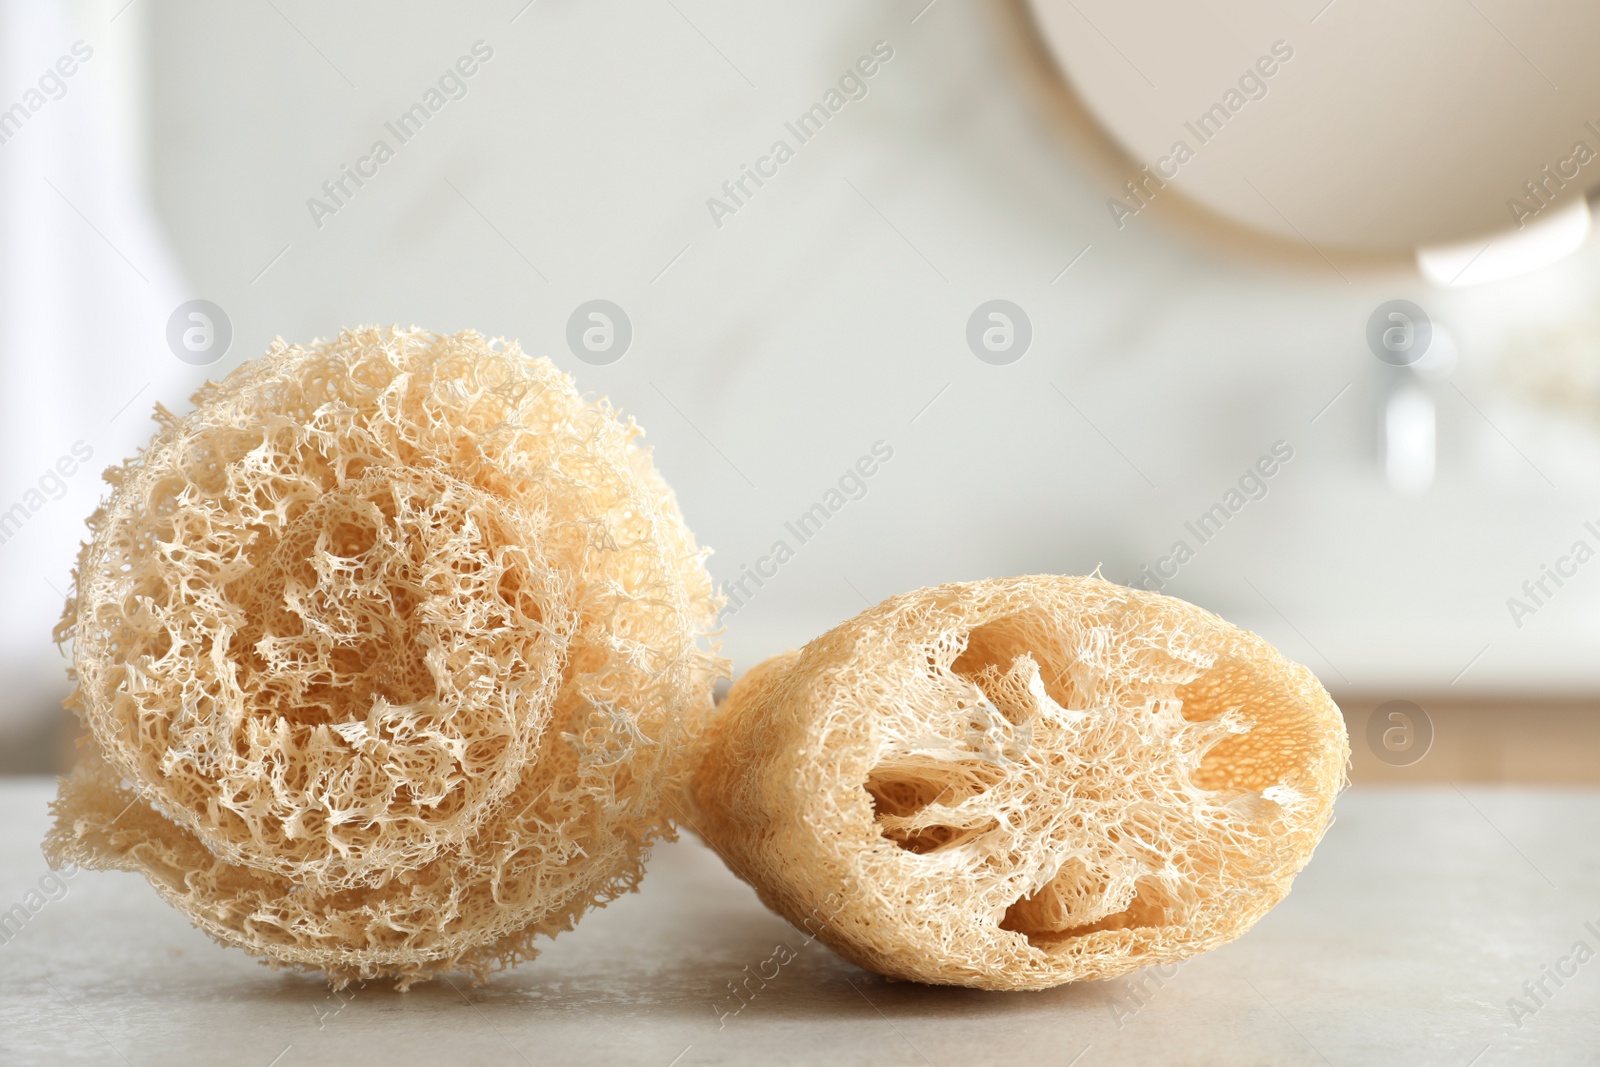 Photo of Natural loofah sponges on table in bathroom